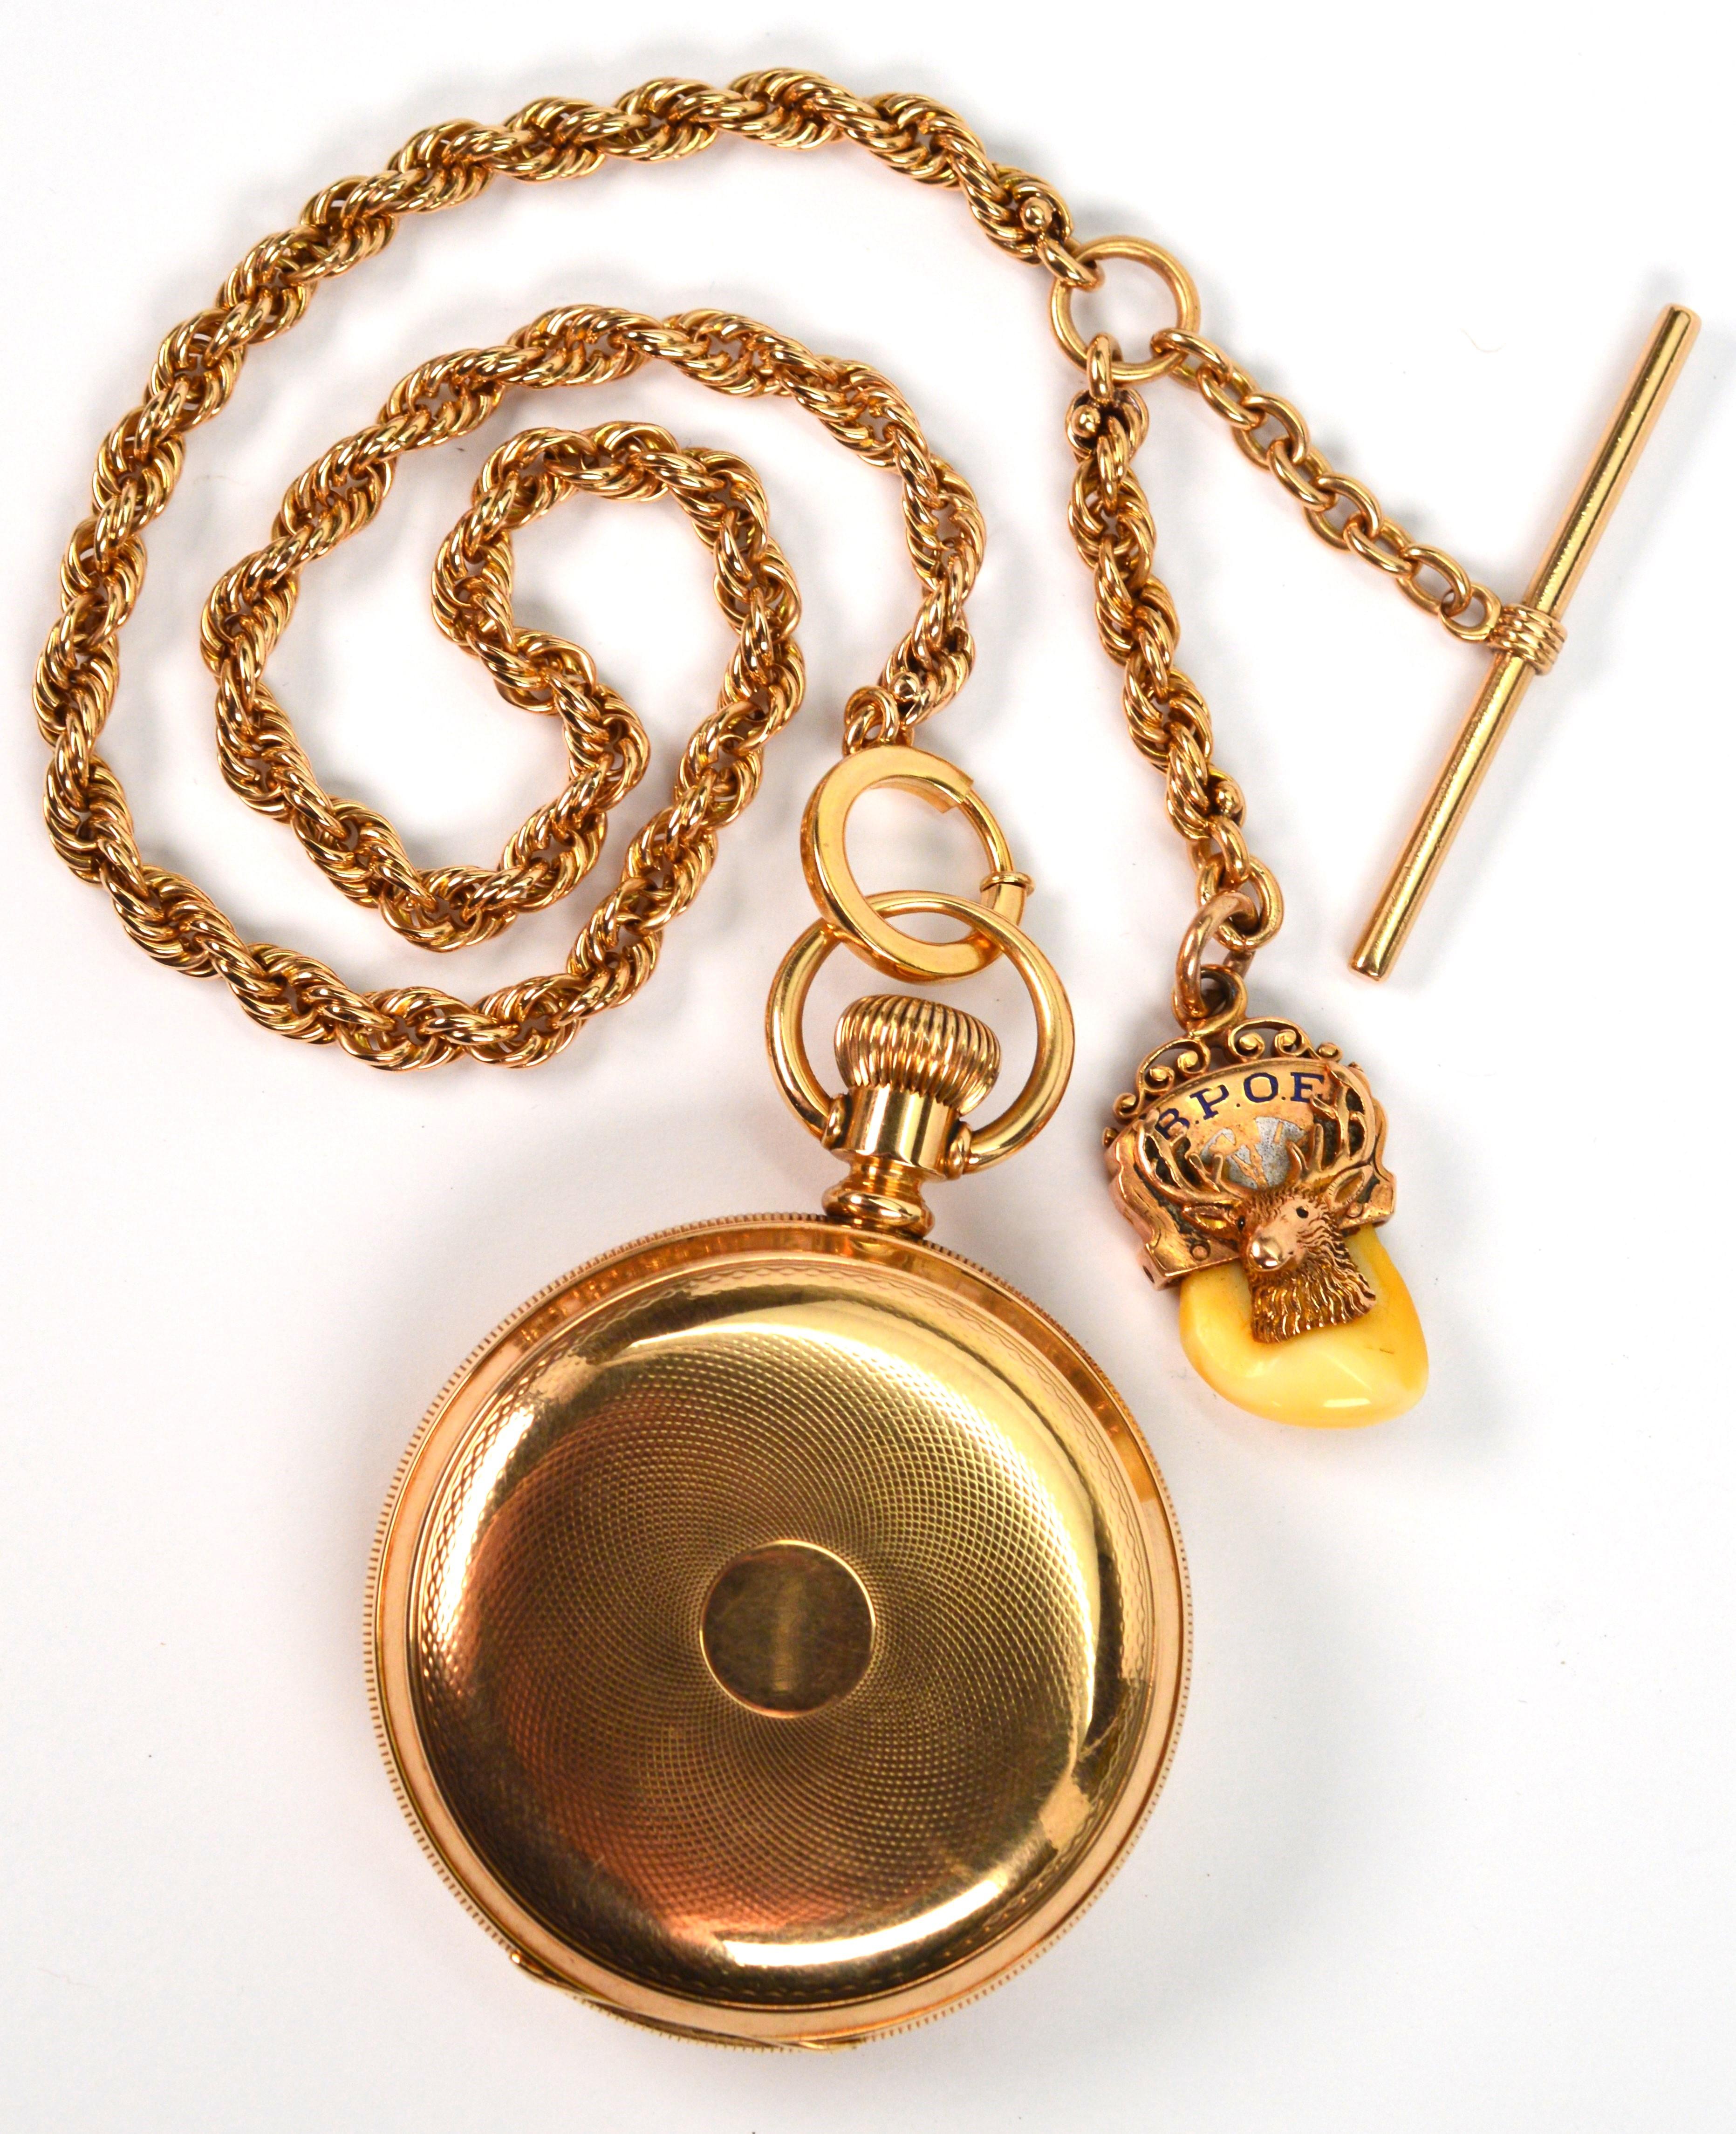 Elgin National 14K Yellow Gold Pocket Watch w Chain Elks Tooth Fob   For Sale 4